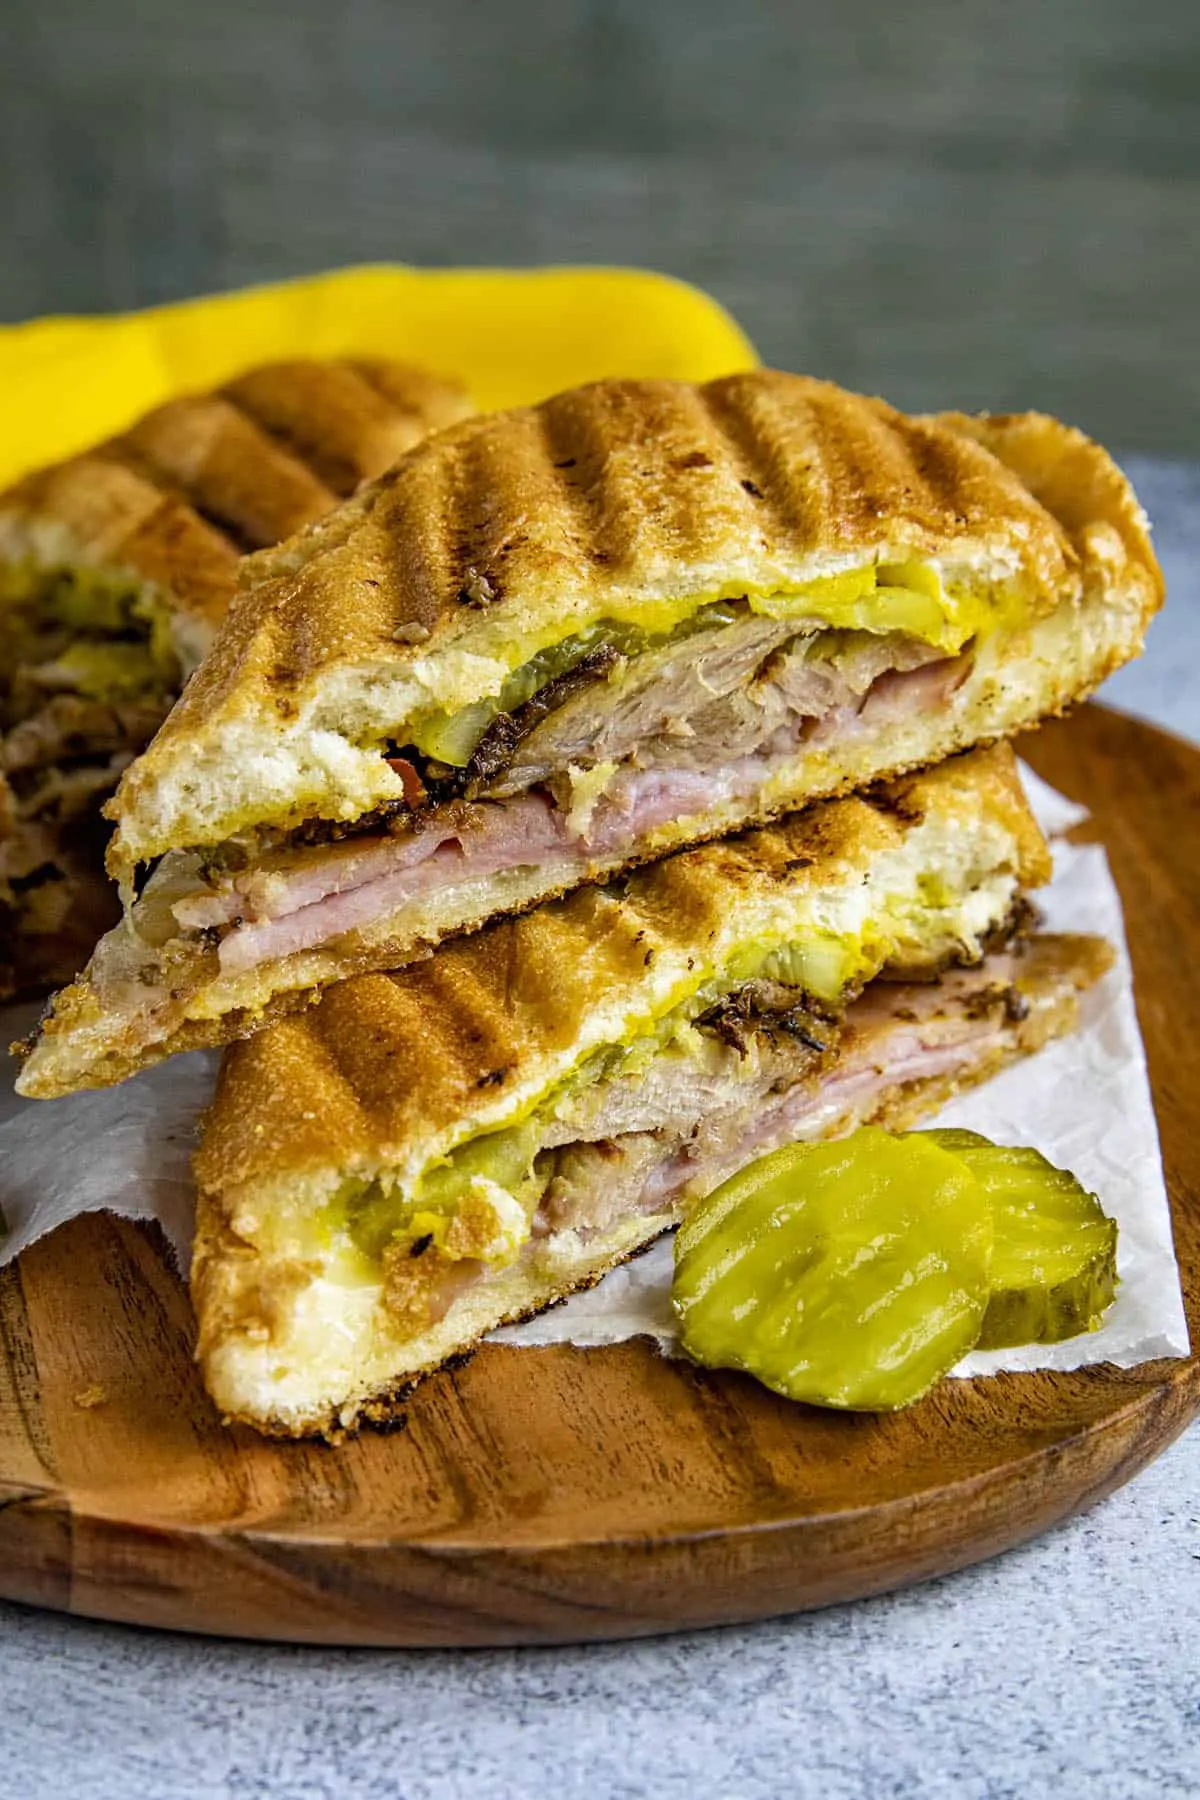 Slices Cuban Sandwiches on a plate